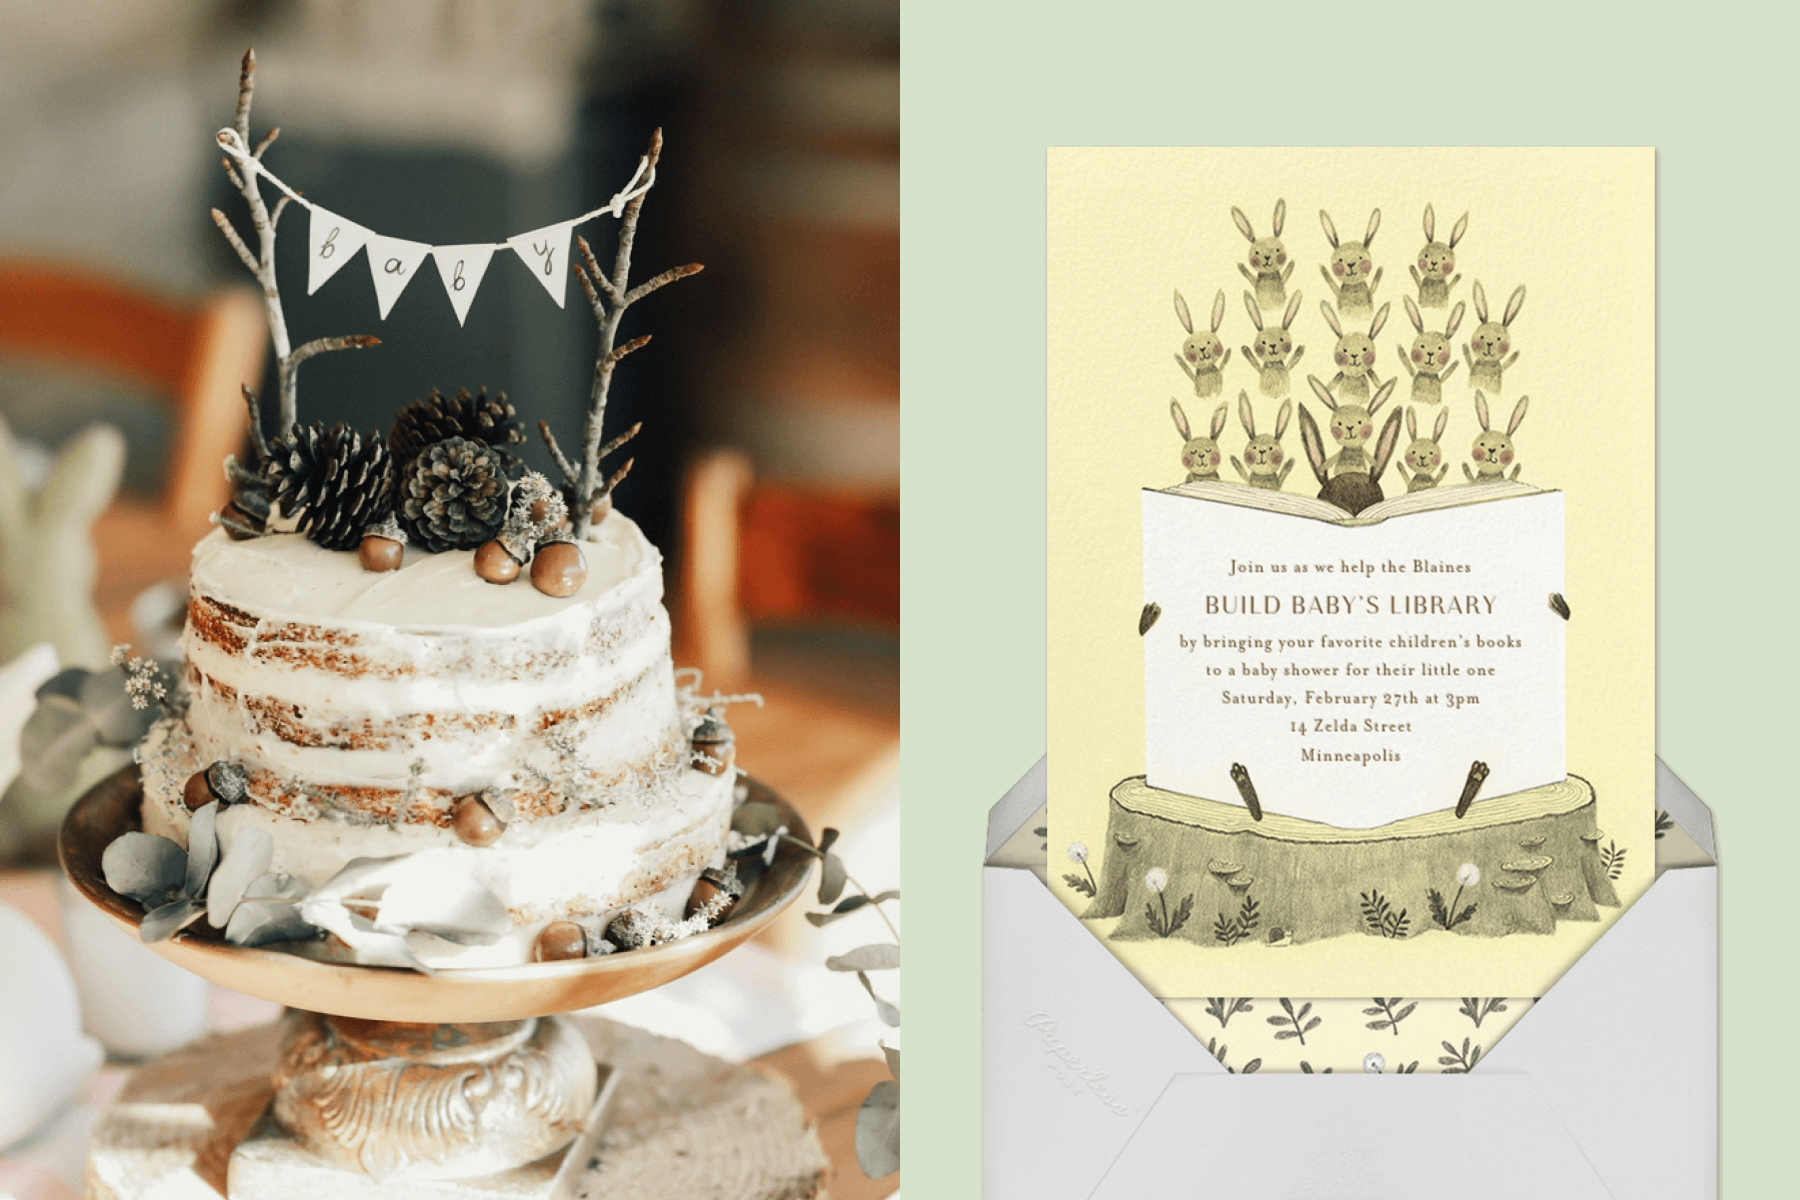 left: A woodsy cake topped with pinecones and acorns. Right: A baby shower invitation with small bunnies reading a book.